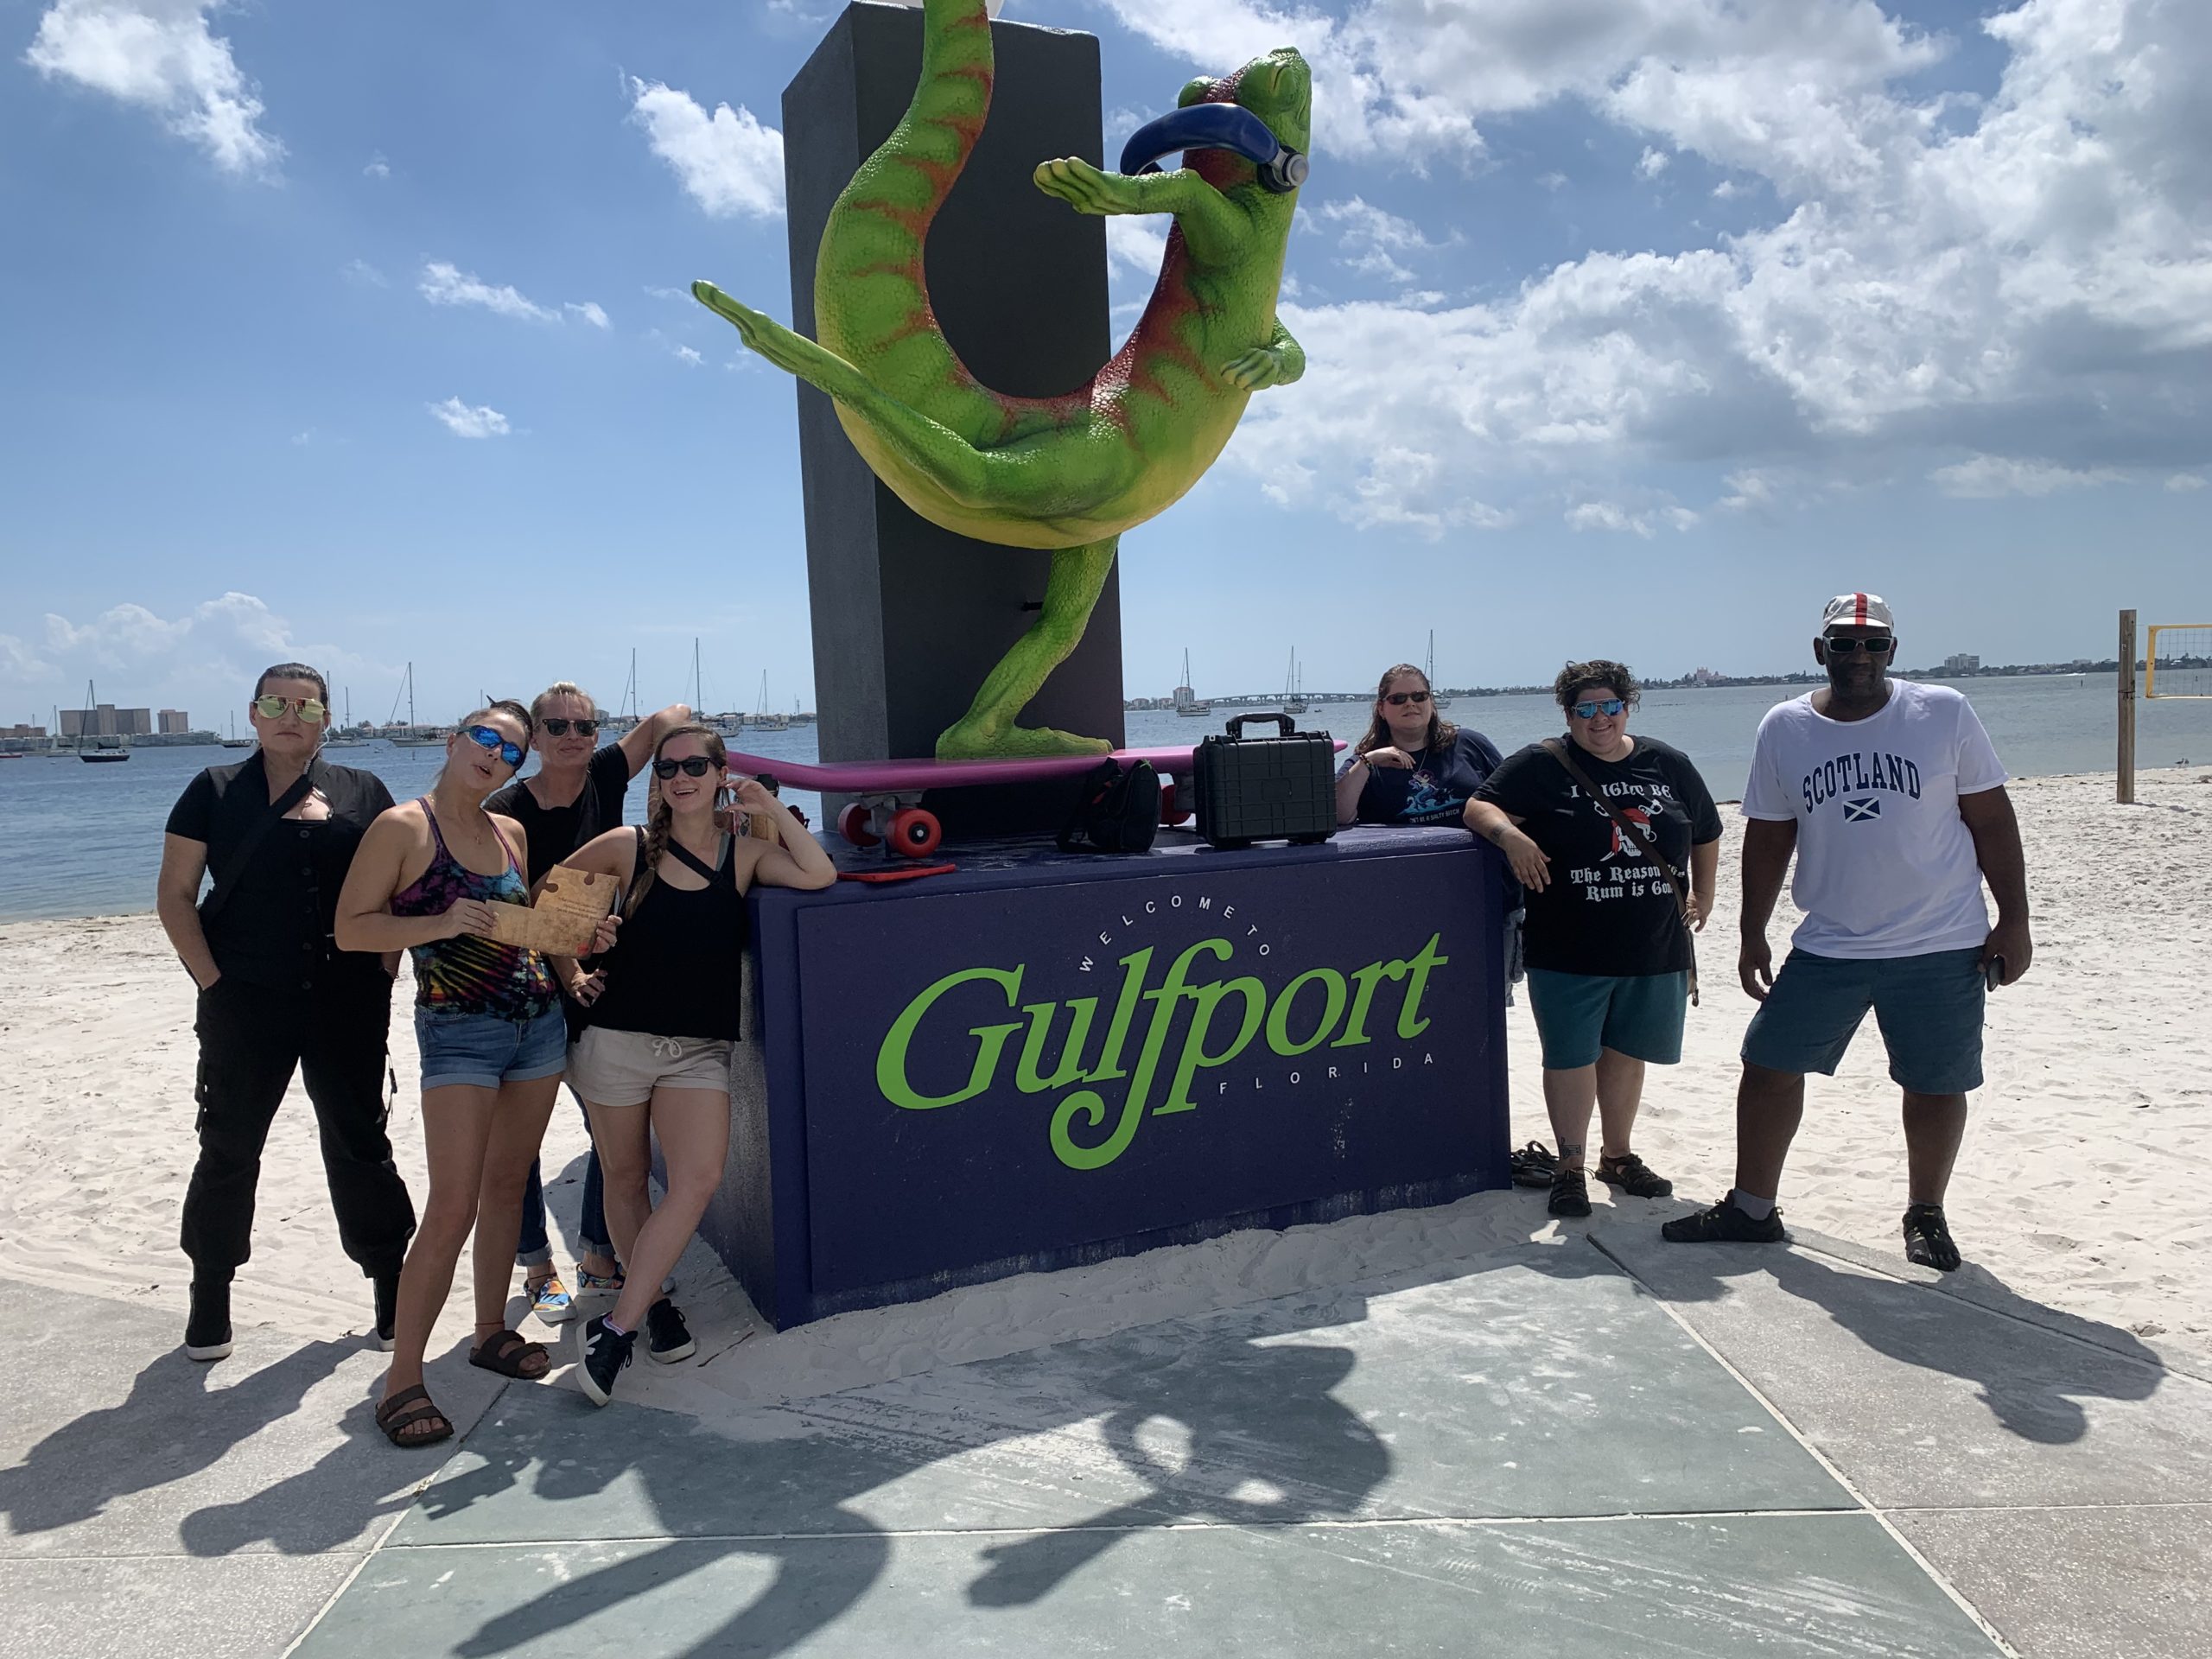 Group of people standing on a beach next to a large sign that says Gulfport topped with a lizard